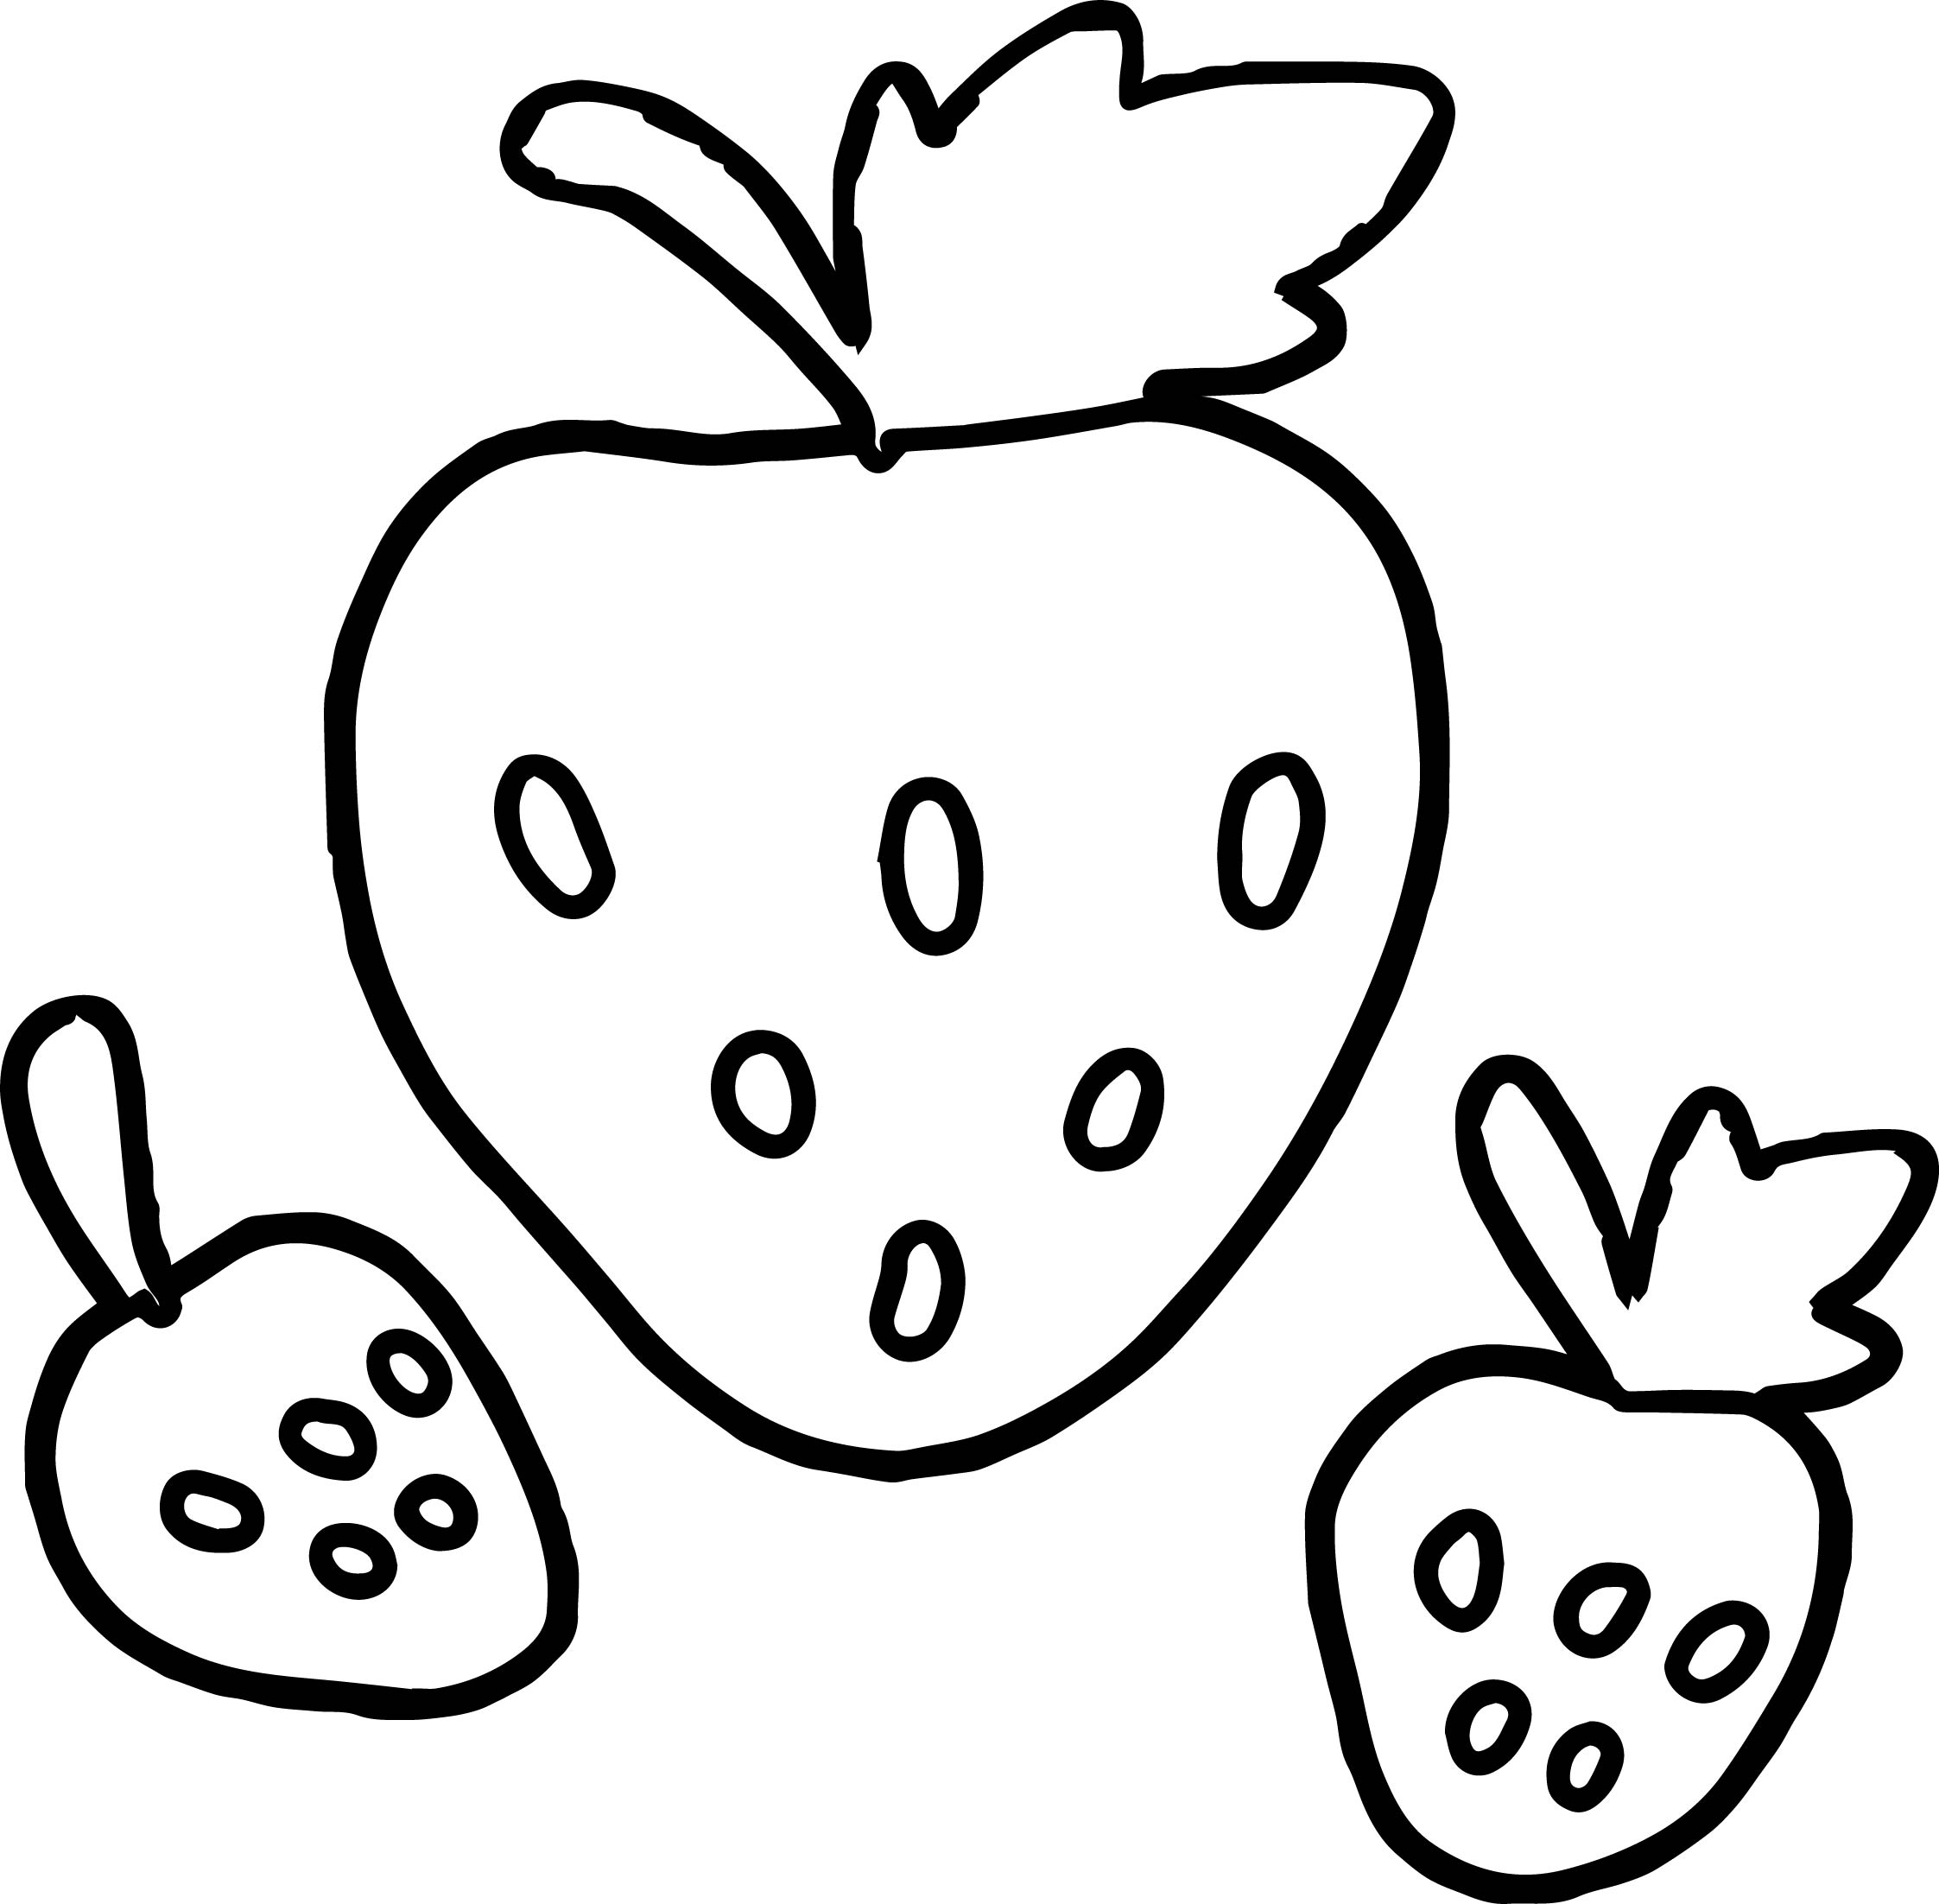 Strawberry Plant Coloring Page at Free printable